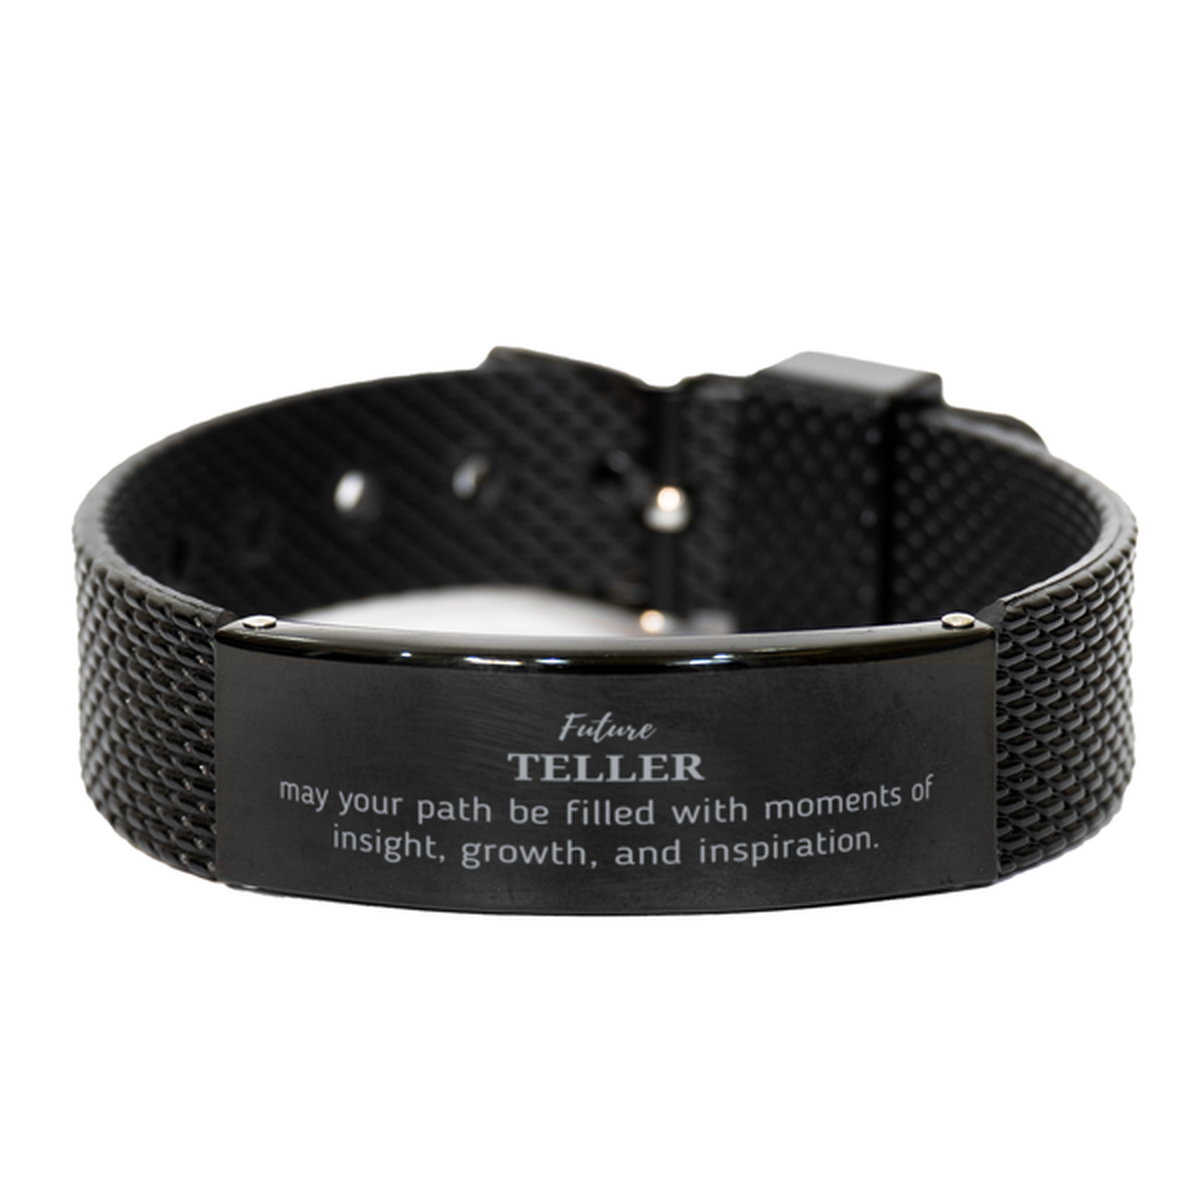 Future Teller Gifts, May your path be filled with moments of insight, Graduation Gifts for New Teller, Christmas Unique Black Shark Mesh Bracelet For Men, Women, Friends